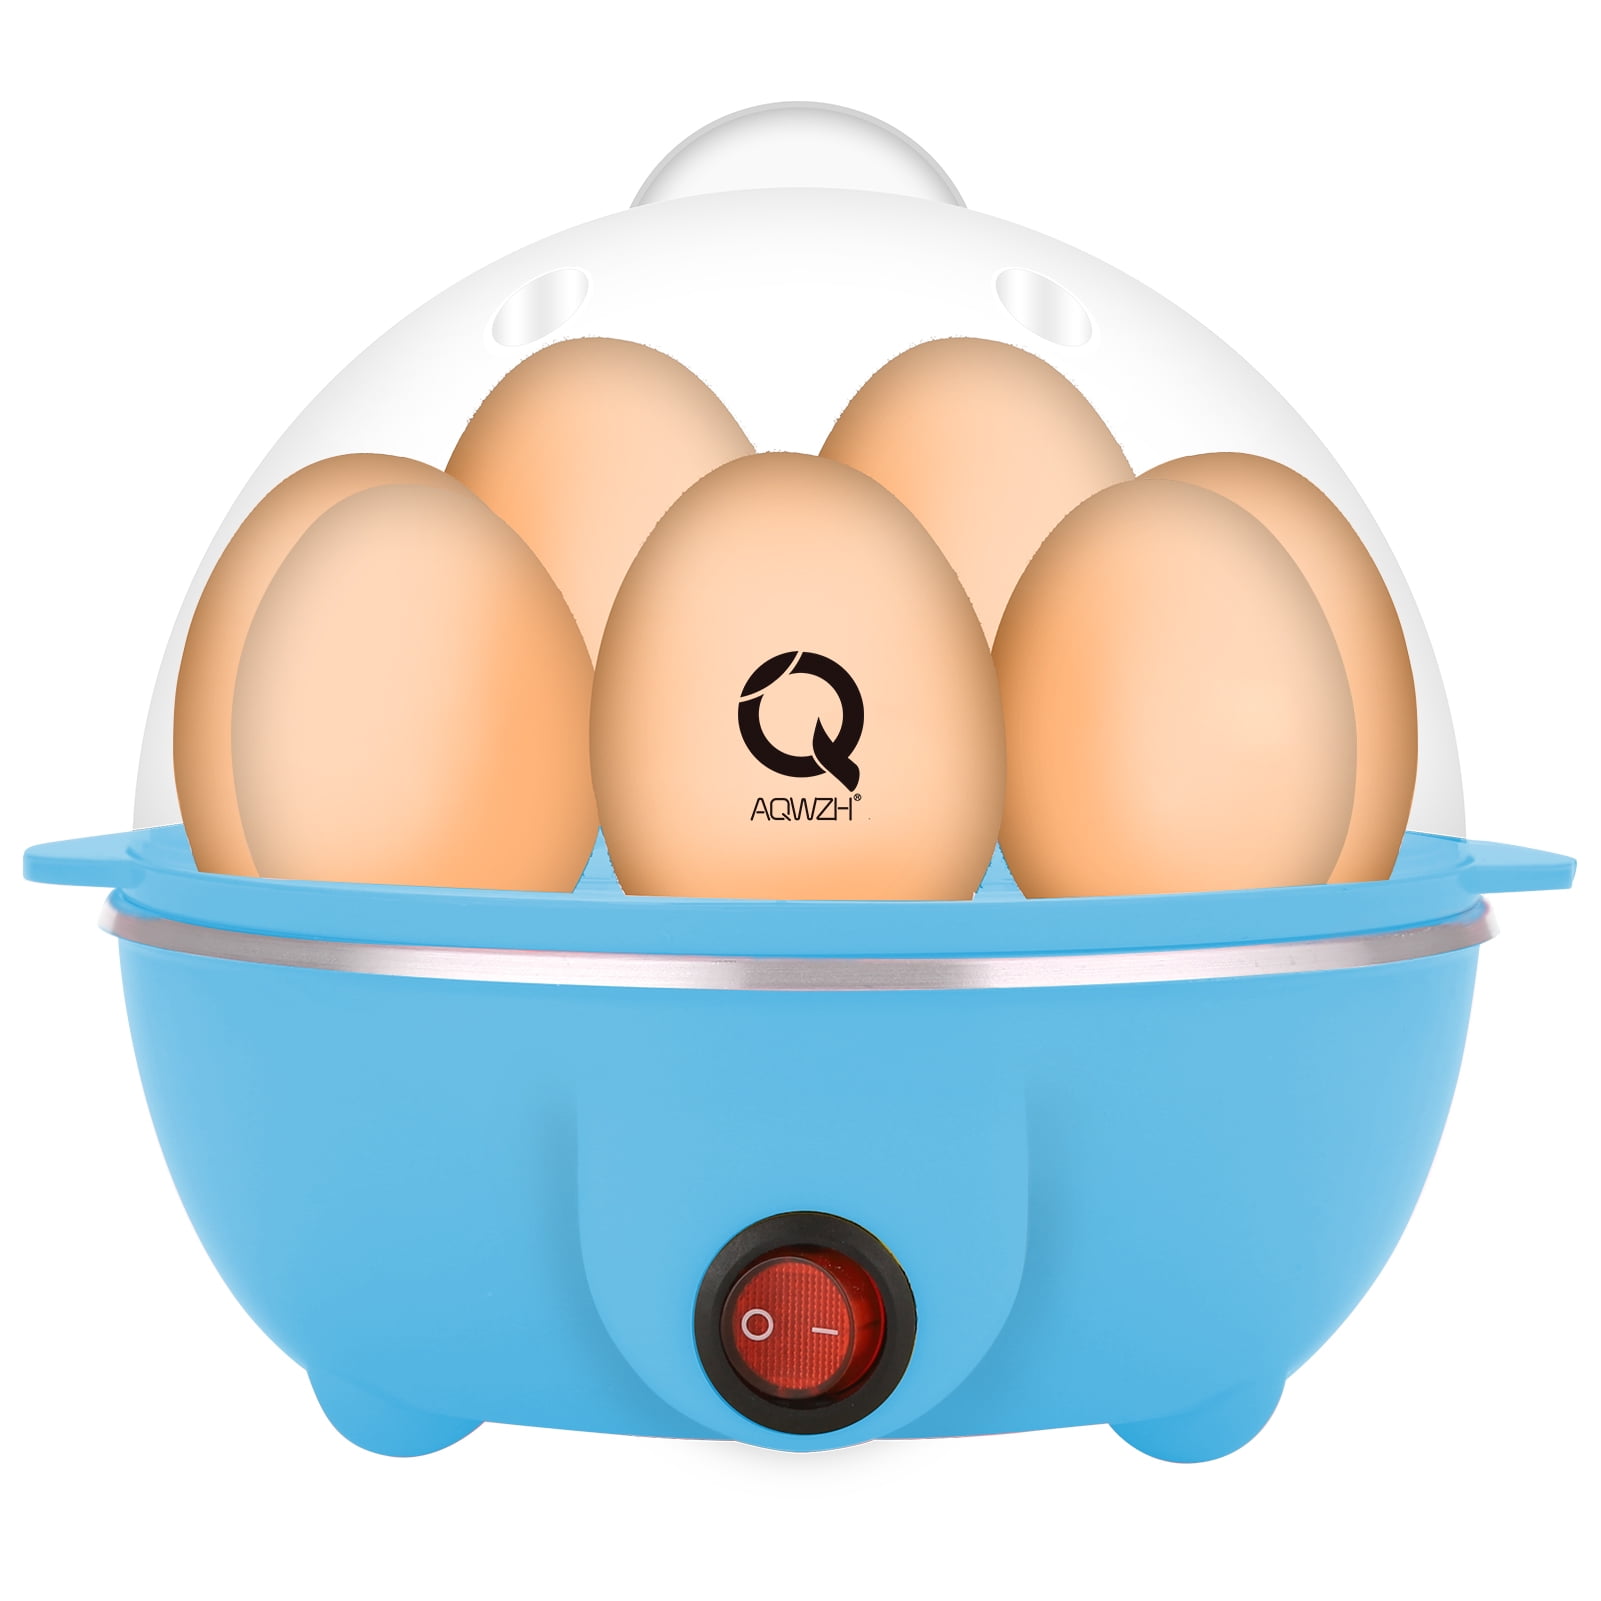 Rapid Egg Cooker: 6 Egg Capacity Electric Egg Cooker for Hard Boiled Eggs or Omelets with Auto Shut Off Feature Poached Eggs Scrambled Eggs Blue 